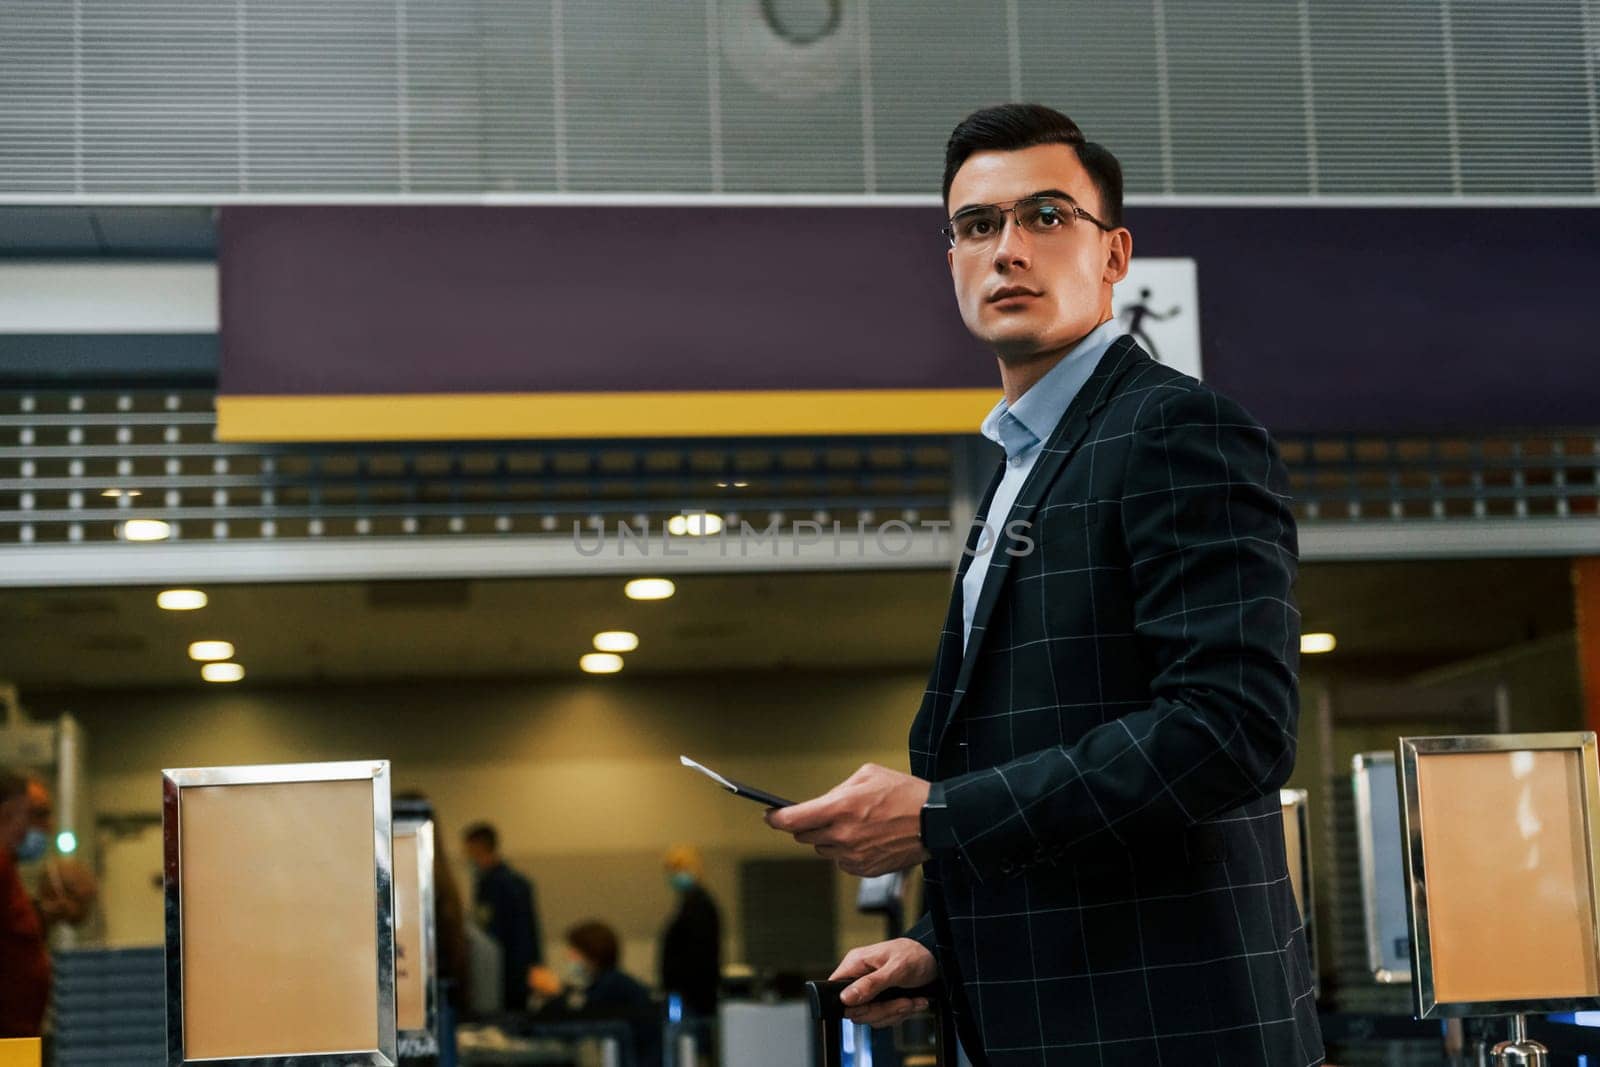 Modern background. Young businessman in formal clothes is in the airport at daytime.